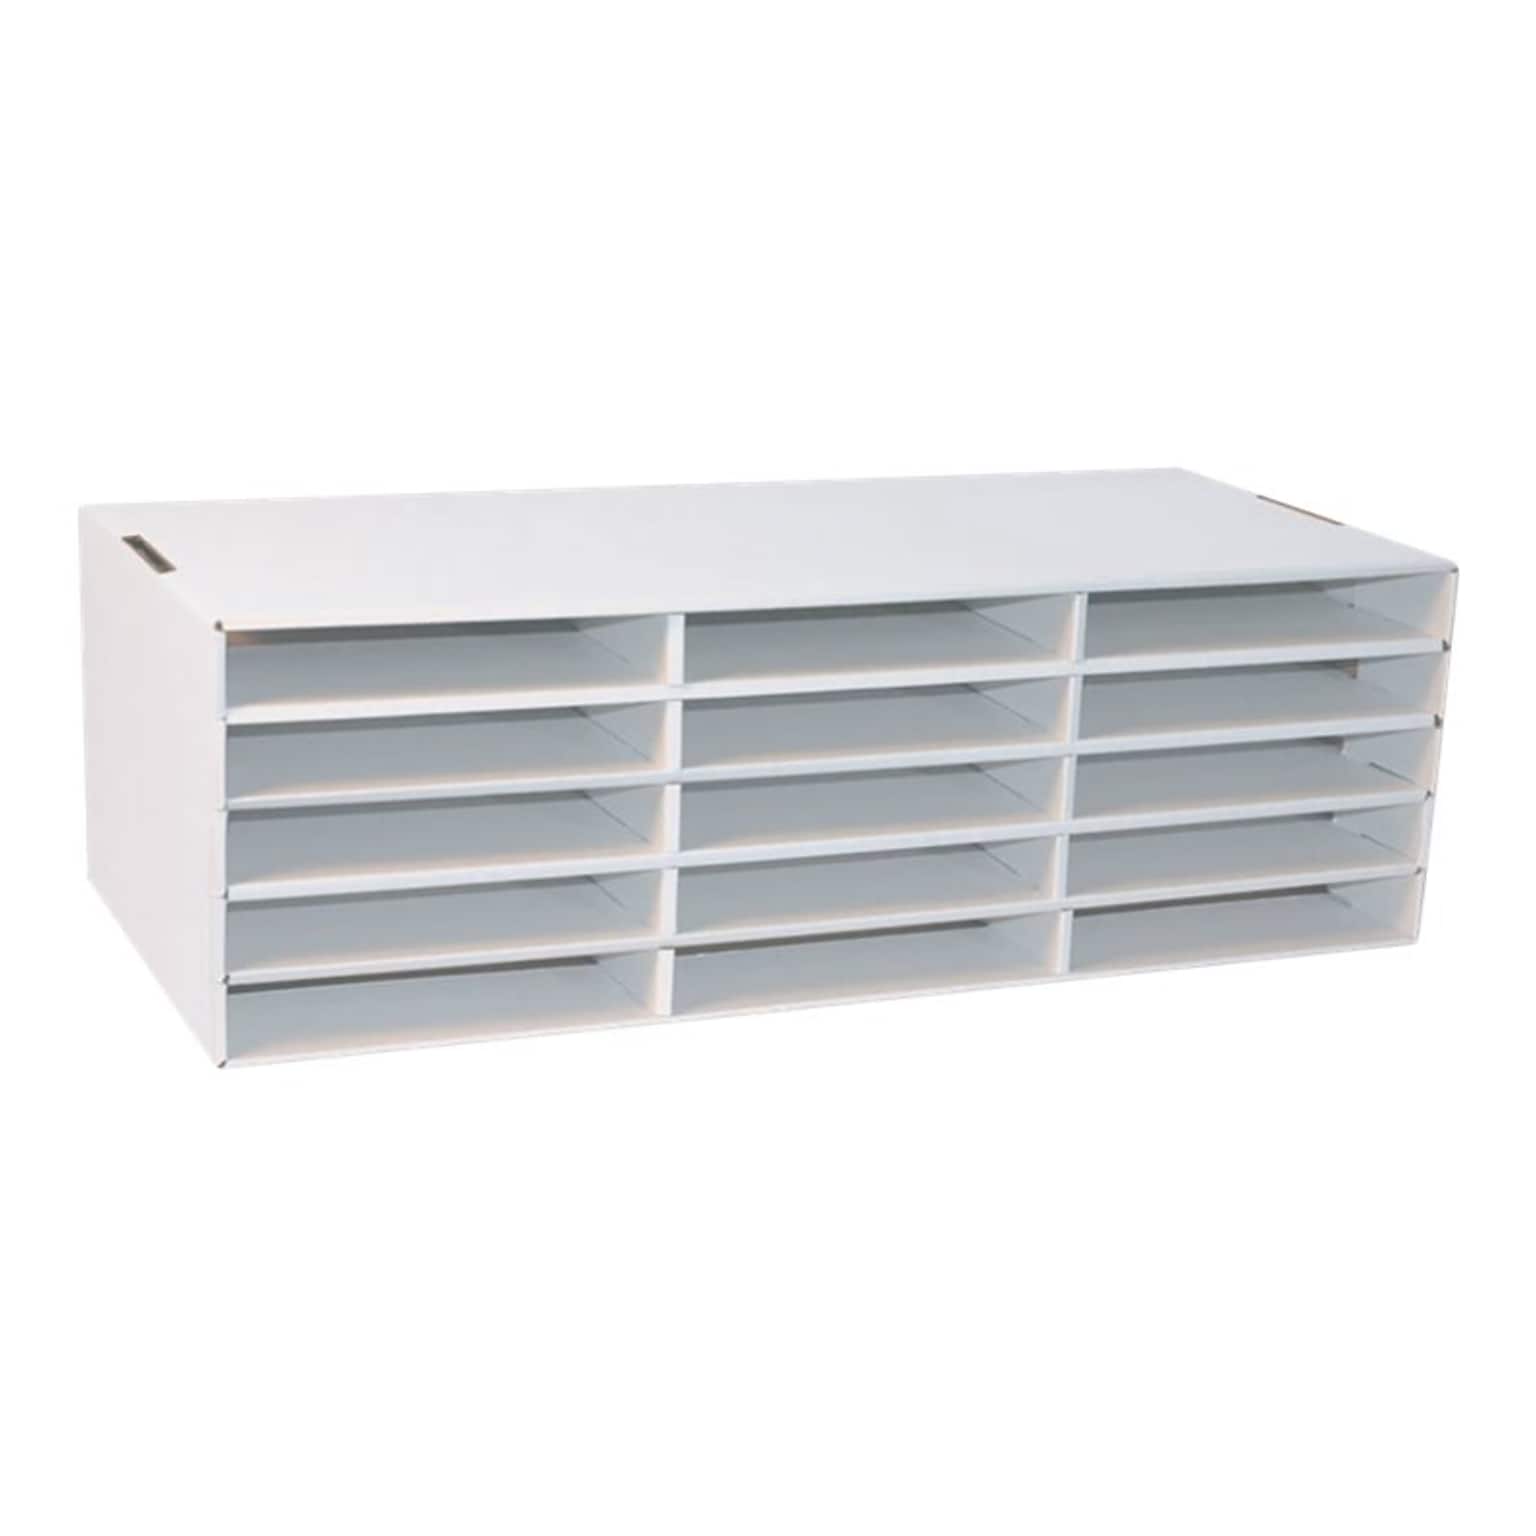 Pacon Classroom Keepers Stackable Cardboard File Organizer, 12.88 x 29.25 x 9.38, White (001310)